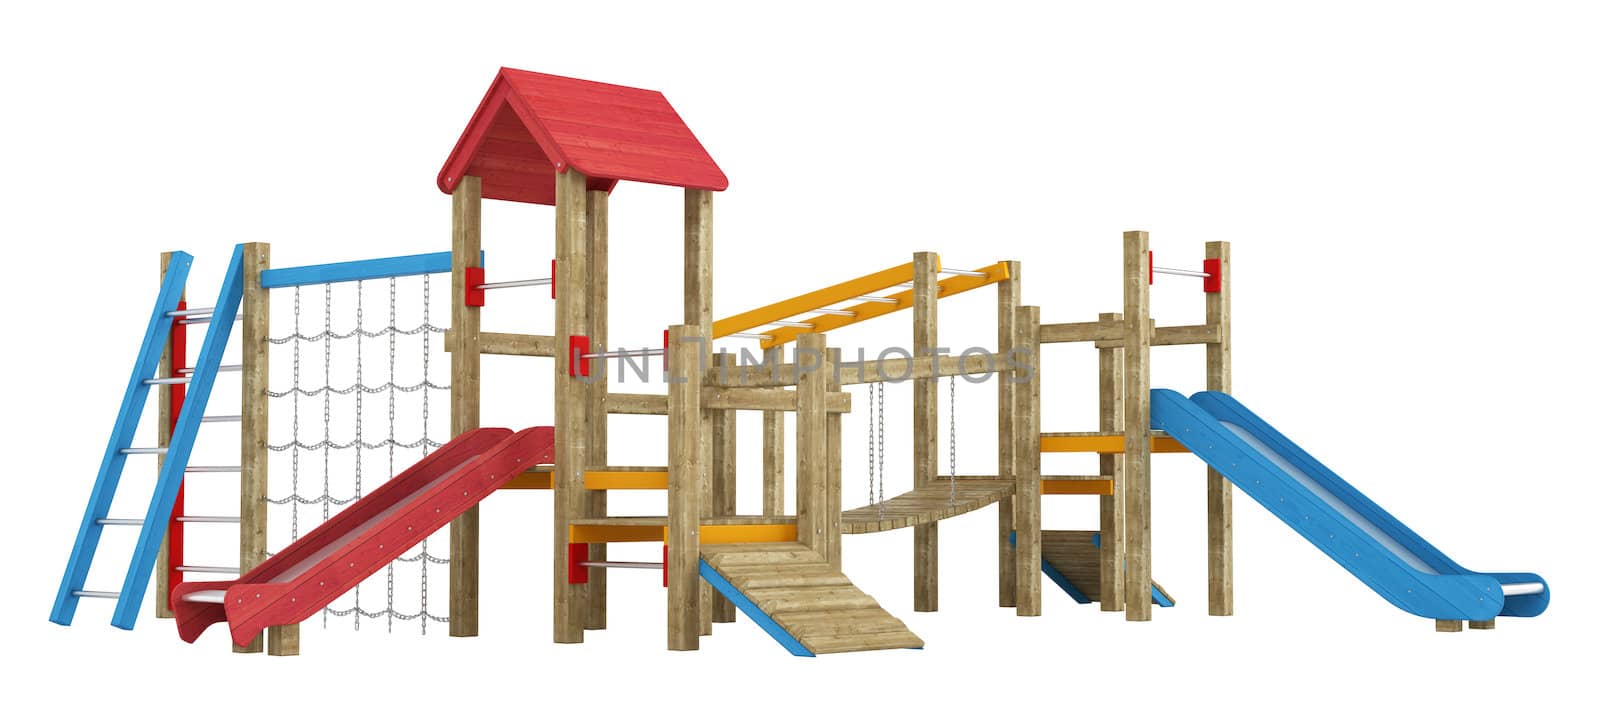 Wooden childrens playground apparatus with slides, climbing frames and walkway isolated on white